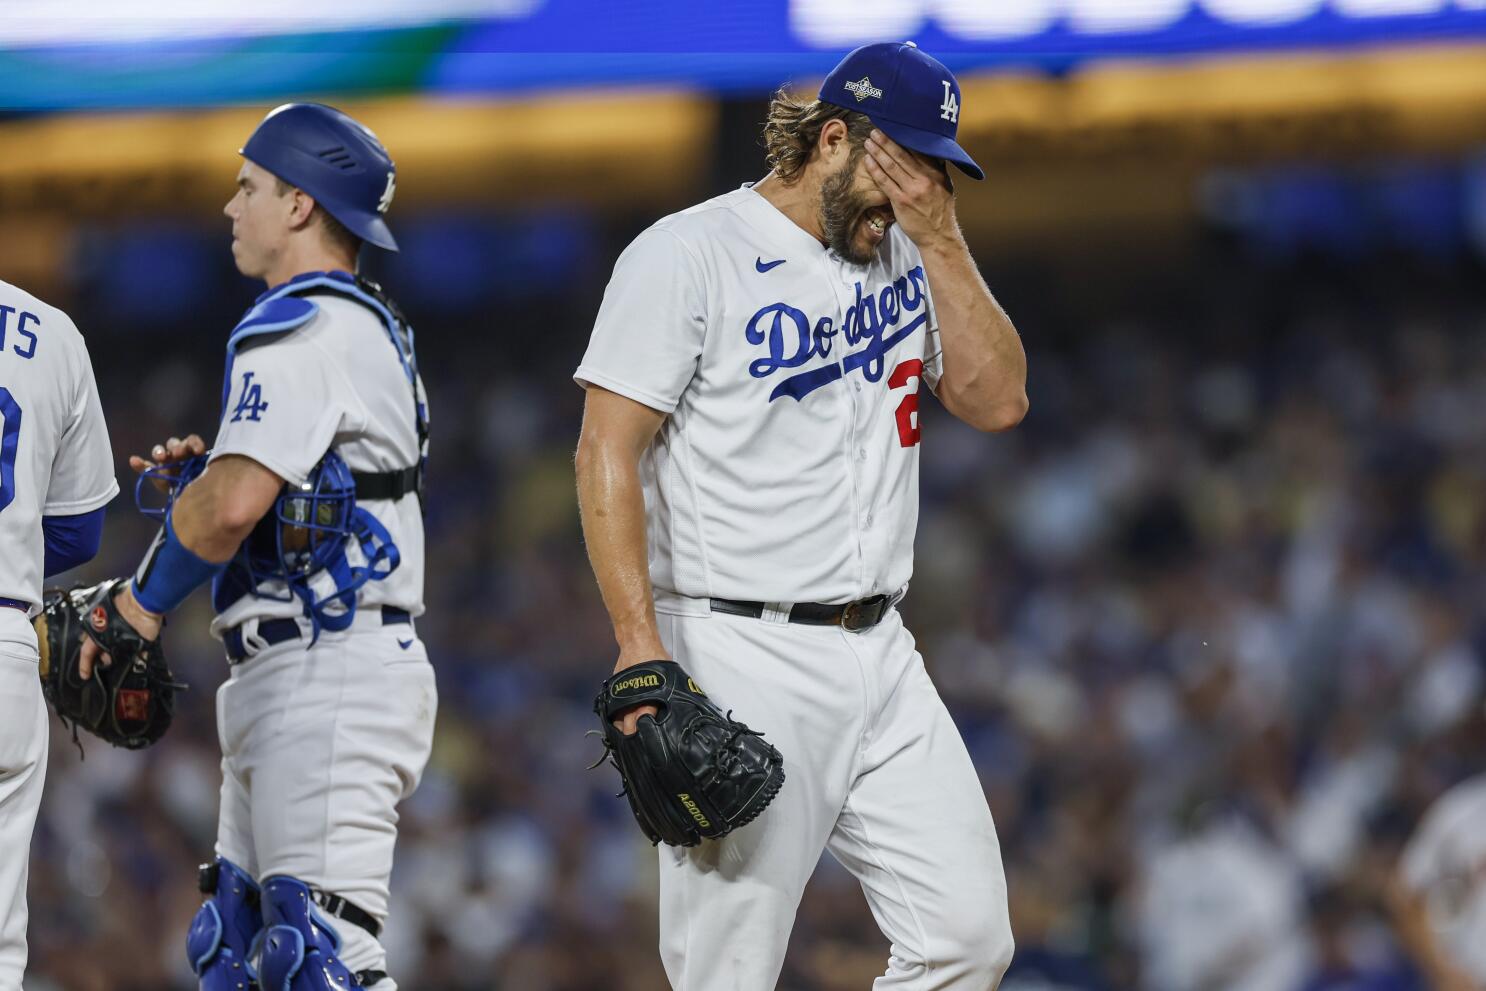 October to forget: Kershaw, Dodgers lose World Series again